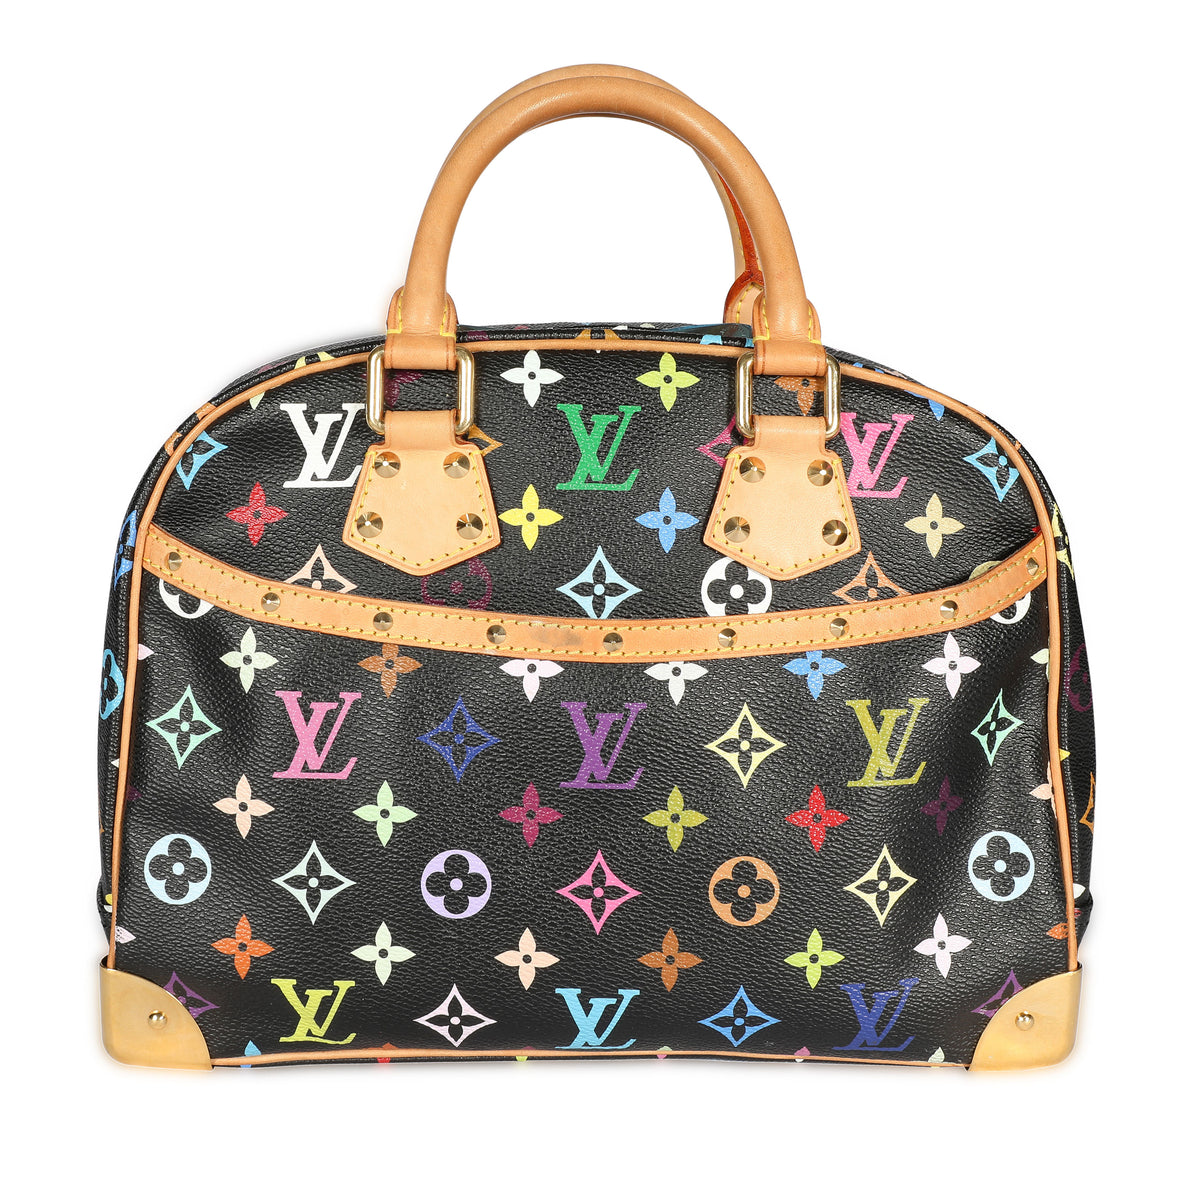 Question about the Louis Vuitton Multicolore Speedy and Takashi